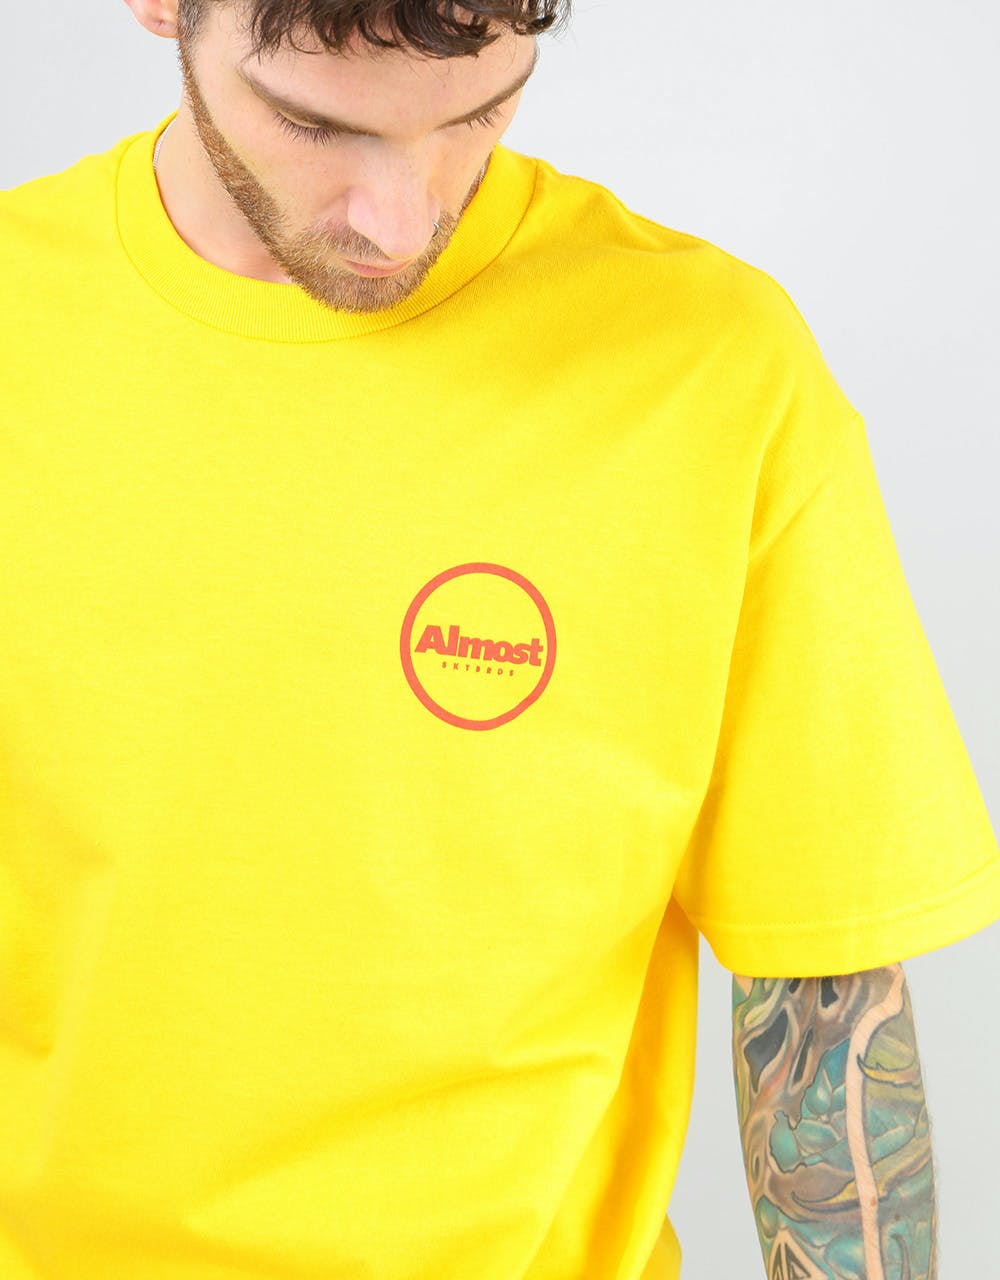 Almost Apex T-Shirt - Yellow